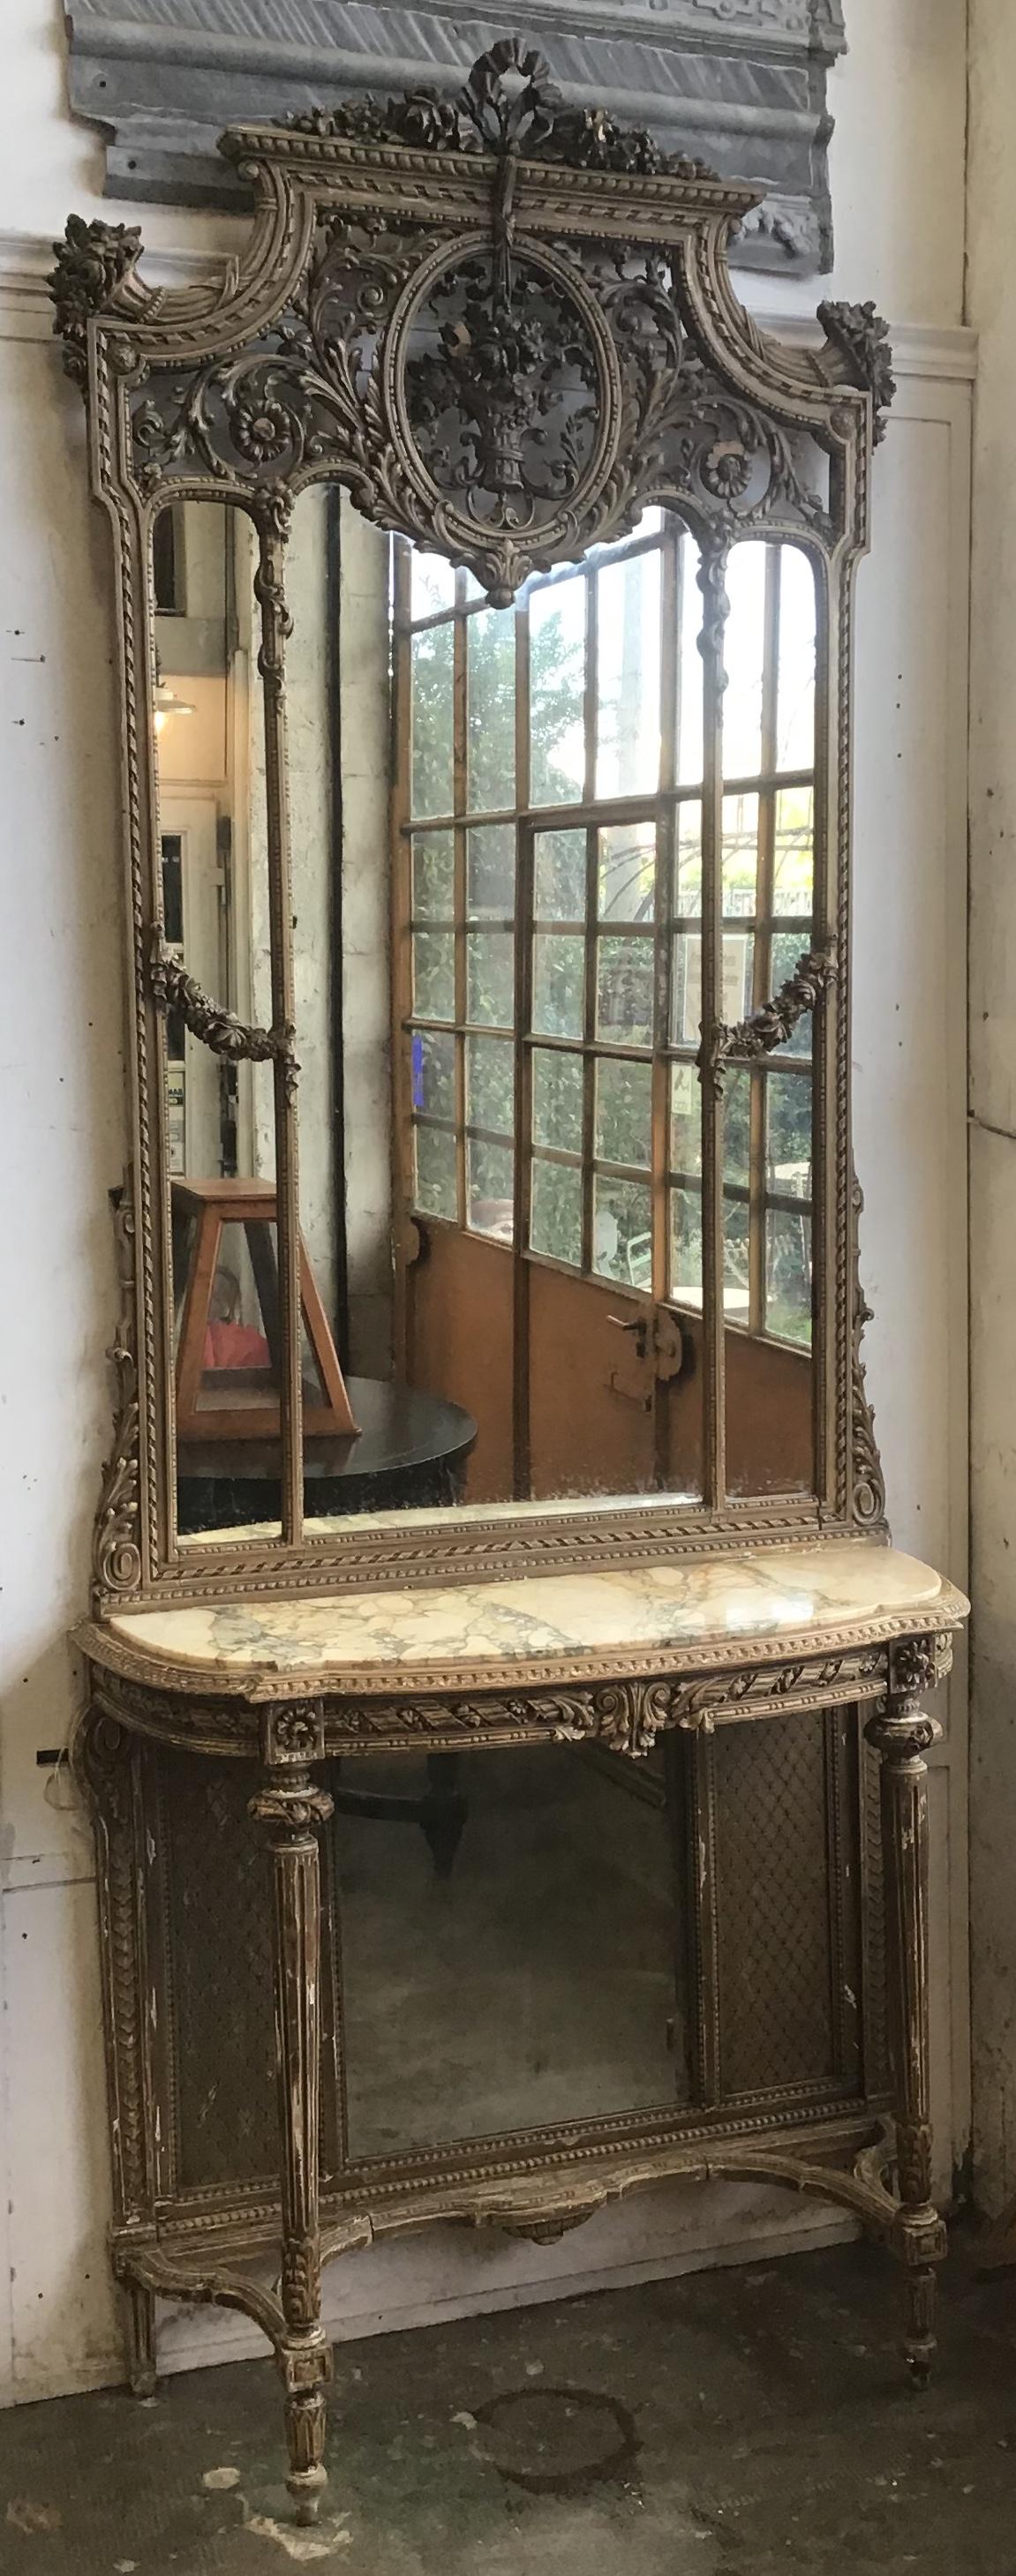 19th century French marble-top console table with giltwood framed mirror from 1890s.